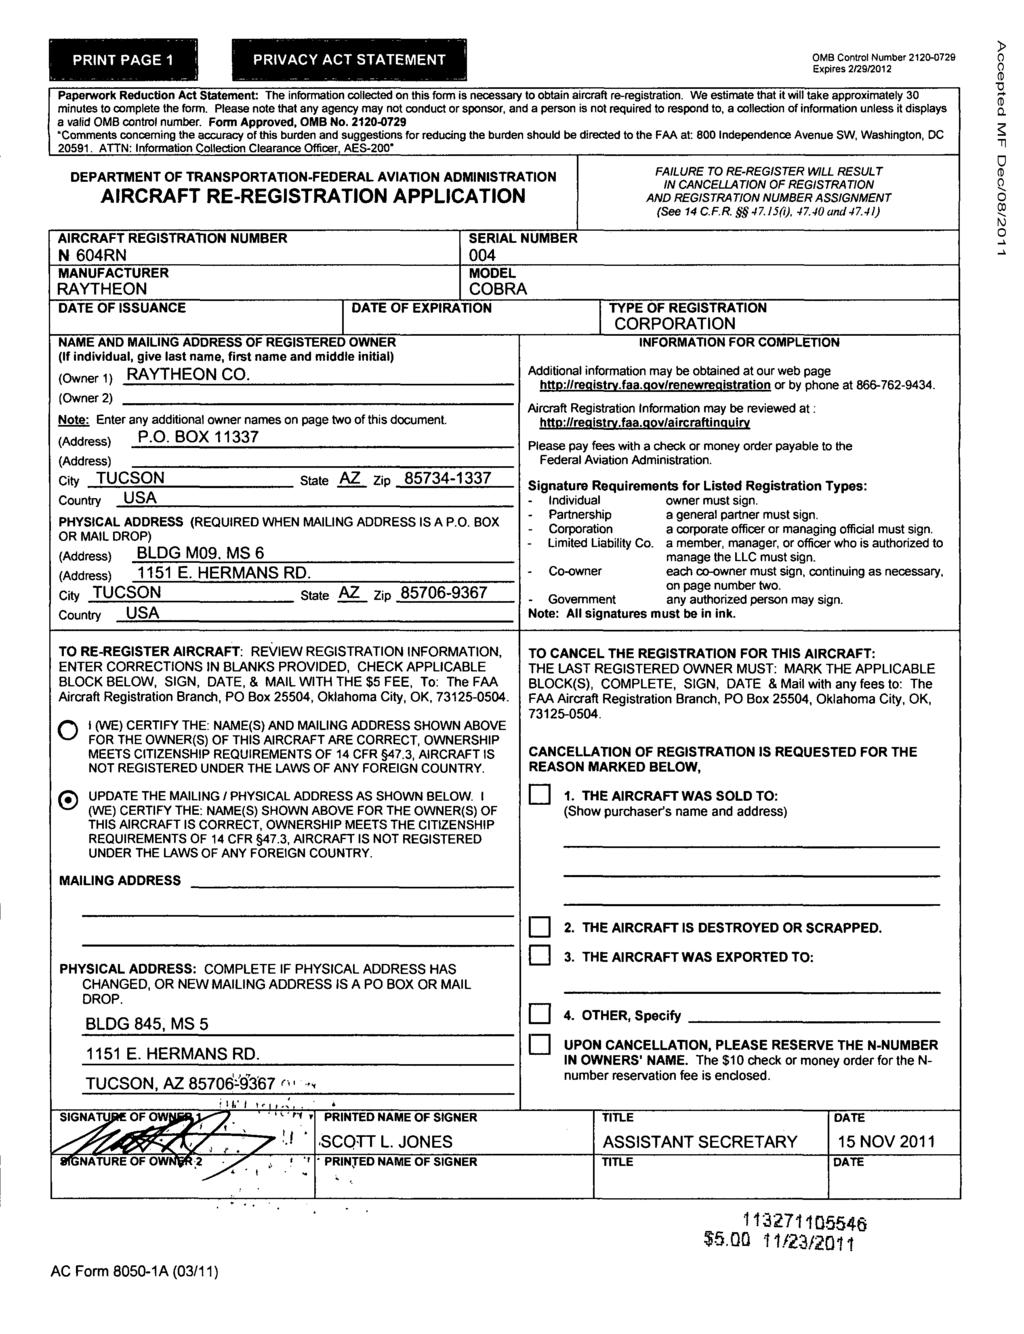 PRINT PAGE 1 PRIVACY ACT STATEMENT OMB Control Number 2120-0729 Expires 2/29/2012 Paperwork Reduction Act Statement: The information collected on this form is necessary to obtain aircraft